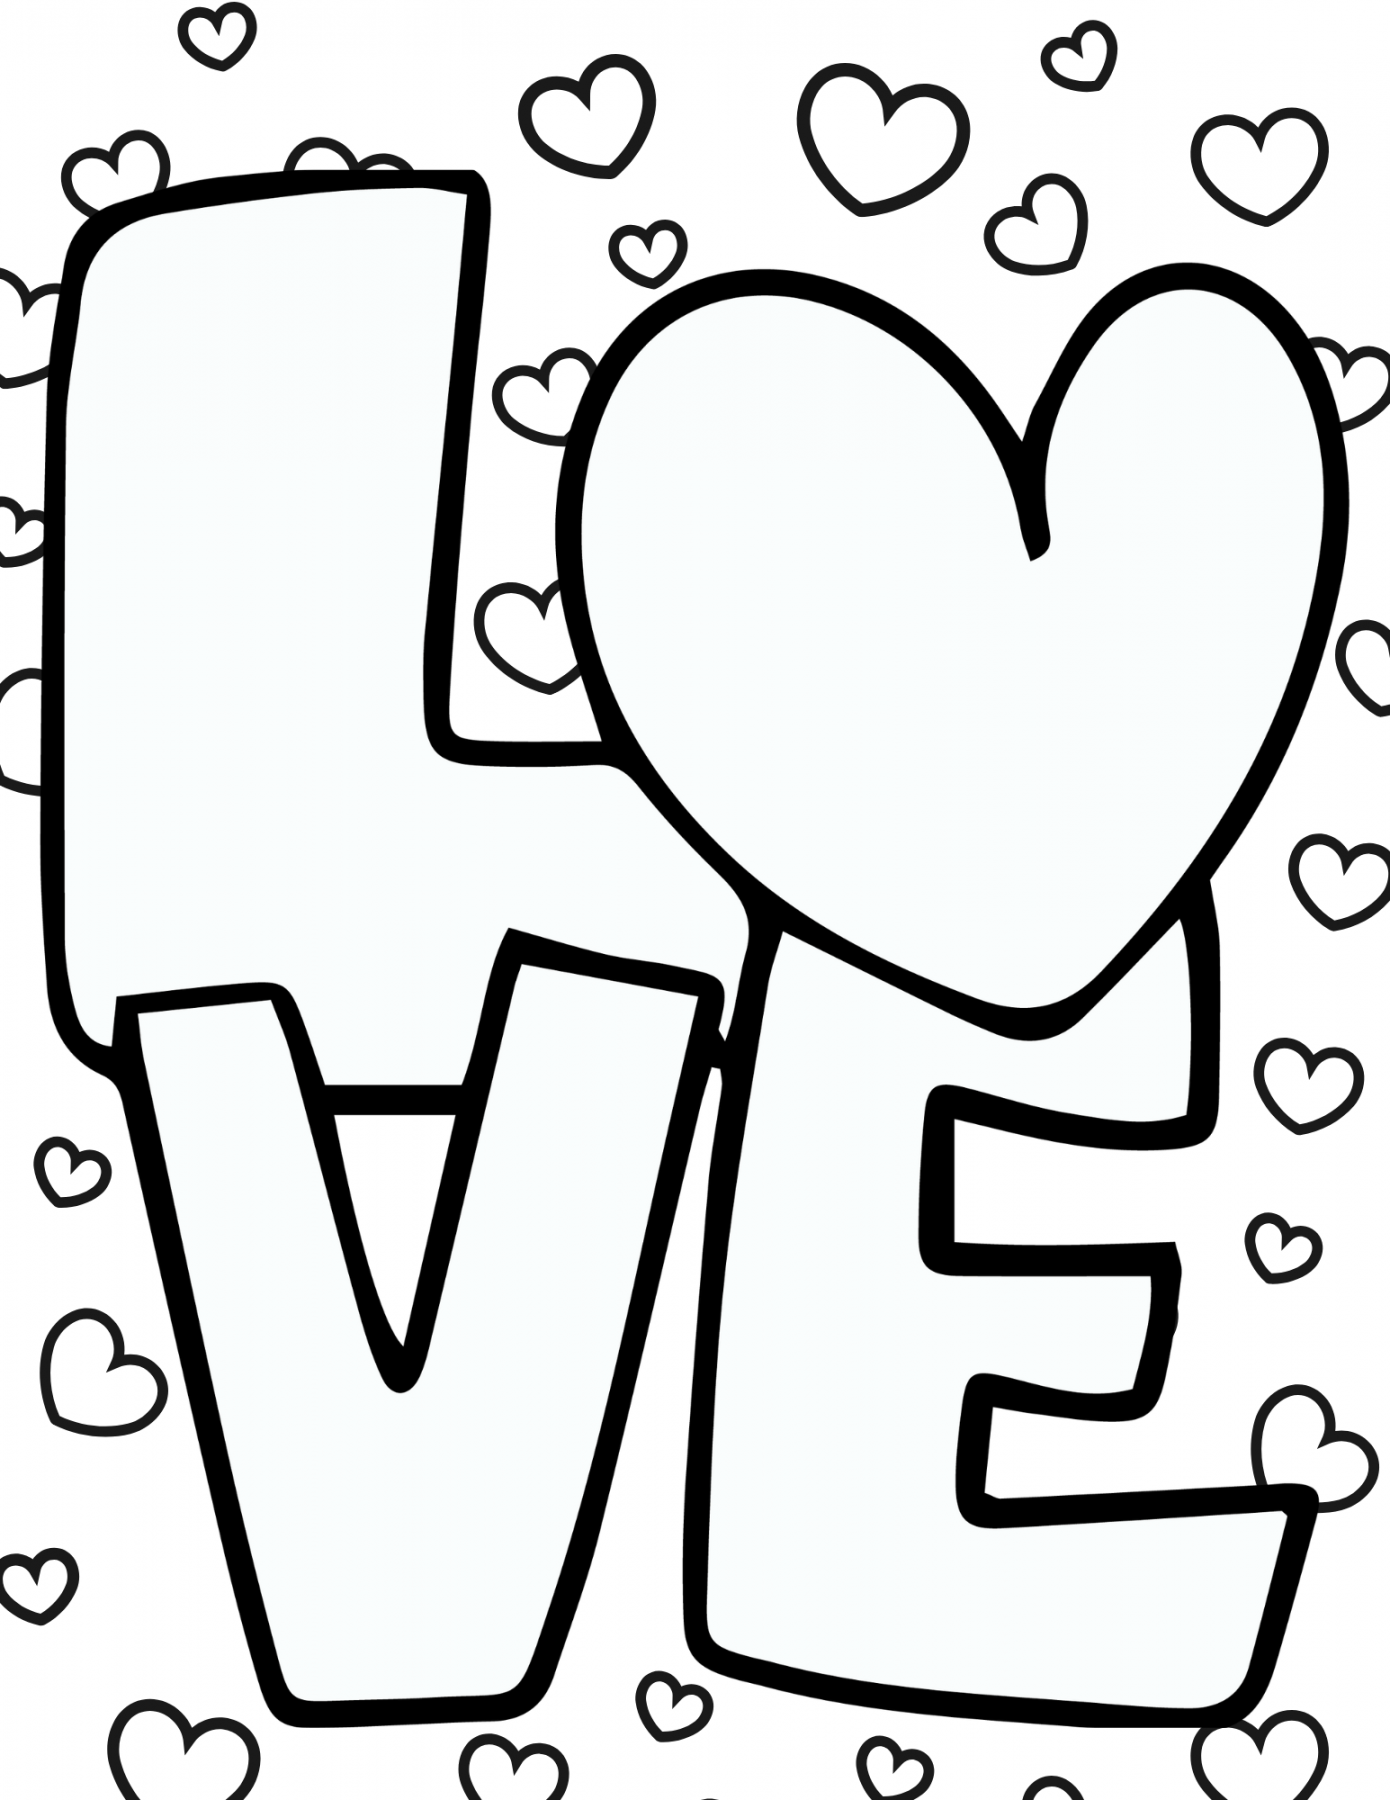 Coloring Pages Free Printable - Printable - Free Printable Love Coloring Pages for Kids and Adults